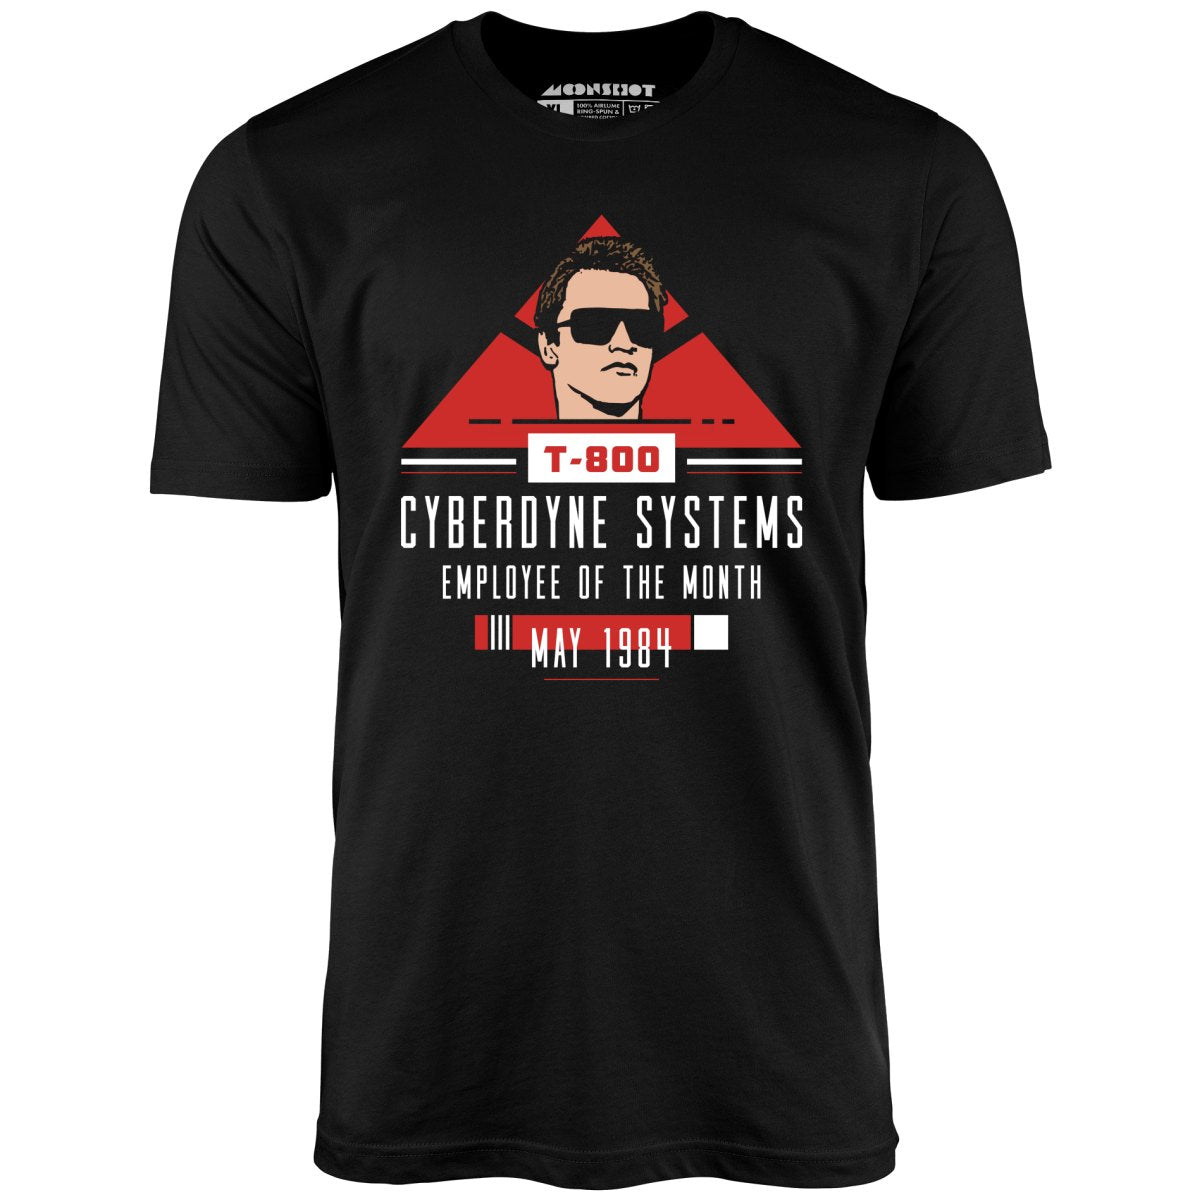 T-800 Cyberdyne Systems Employee of the Month - Unisex T-Shirt